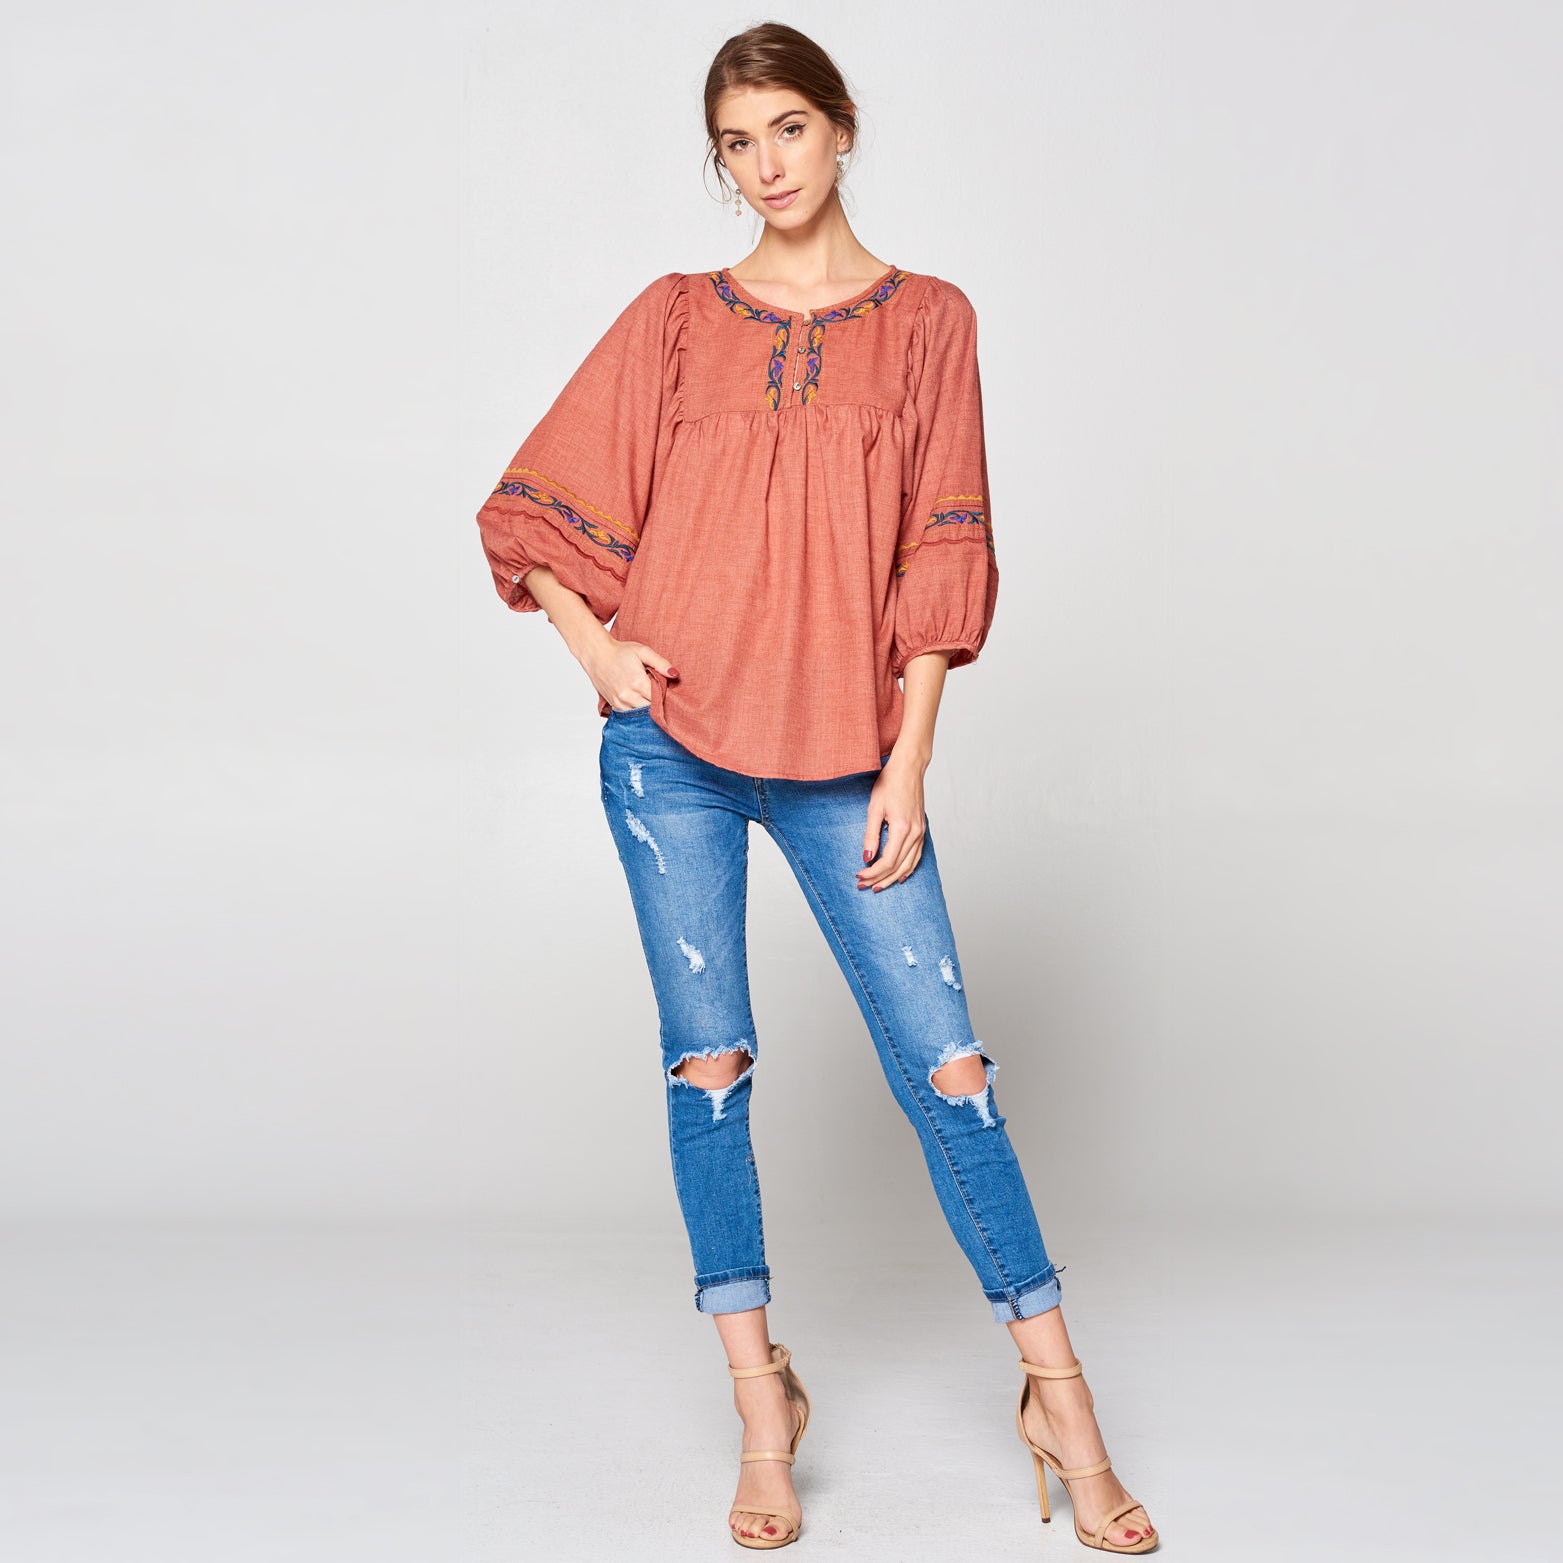 Embroidered Puff Sleeve Top | Fashion Top | blouse, blouses, blue, boho style, coral, denim, embroidered, embroidered puff sleeve top, everyday, long sleeve top, Oversize Tunic, print top, rust, spring tops, spring2019, summer top | Love, Kuza